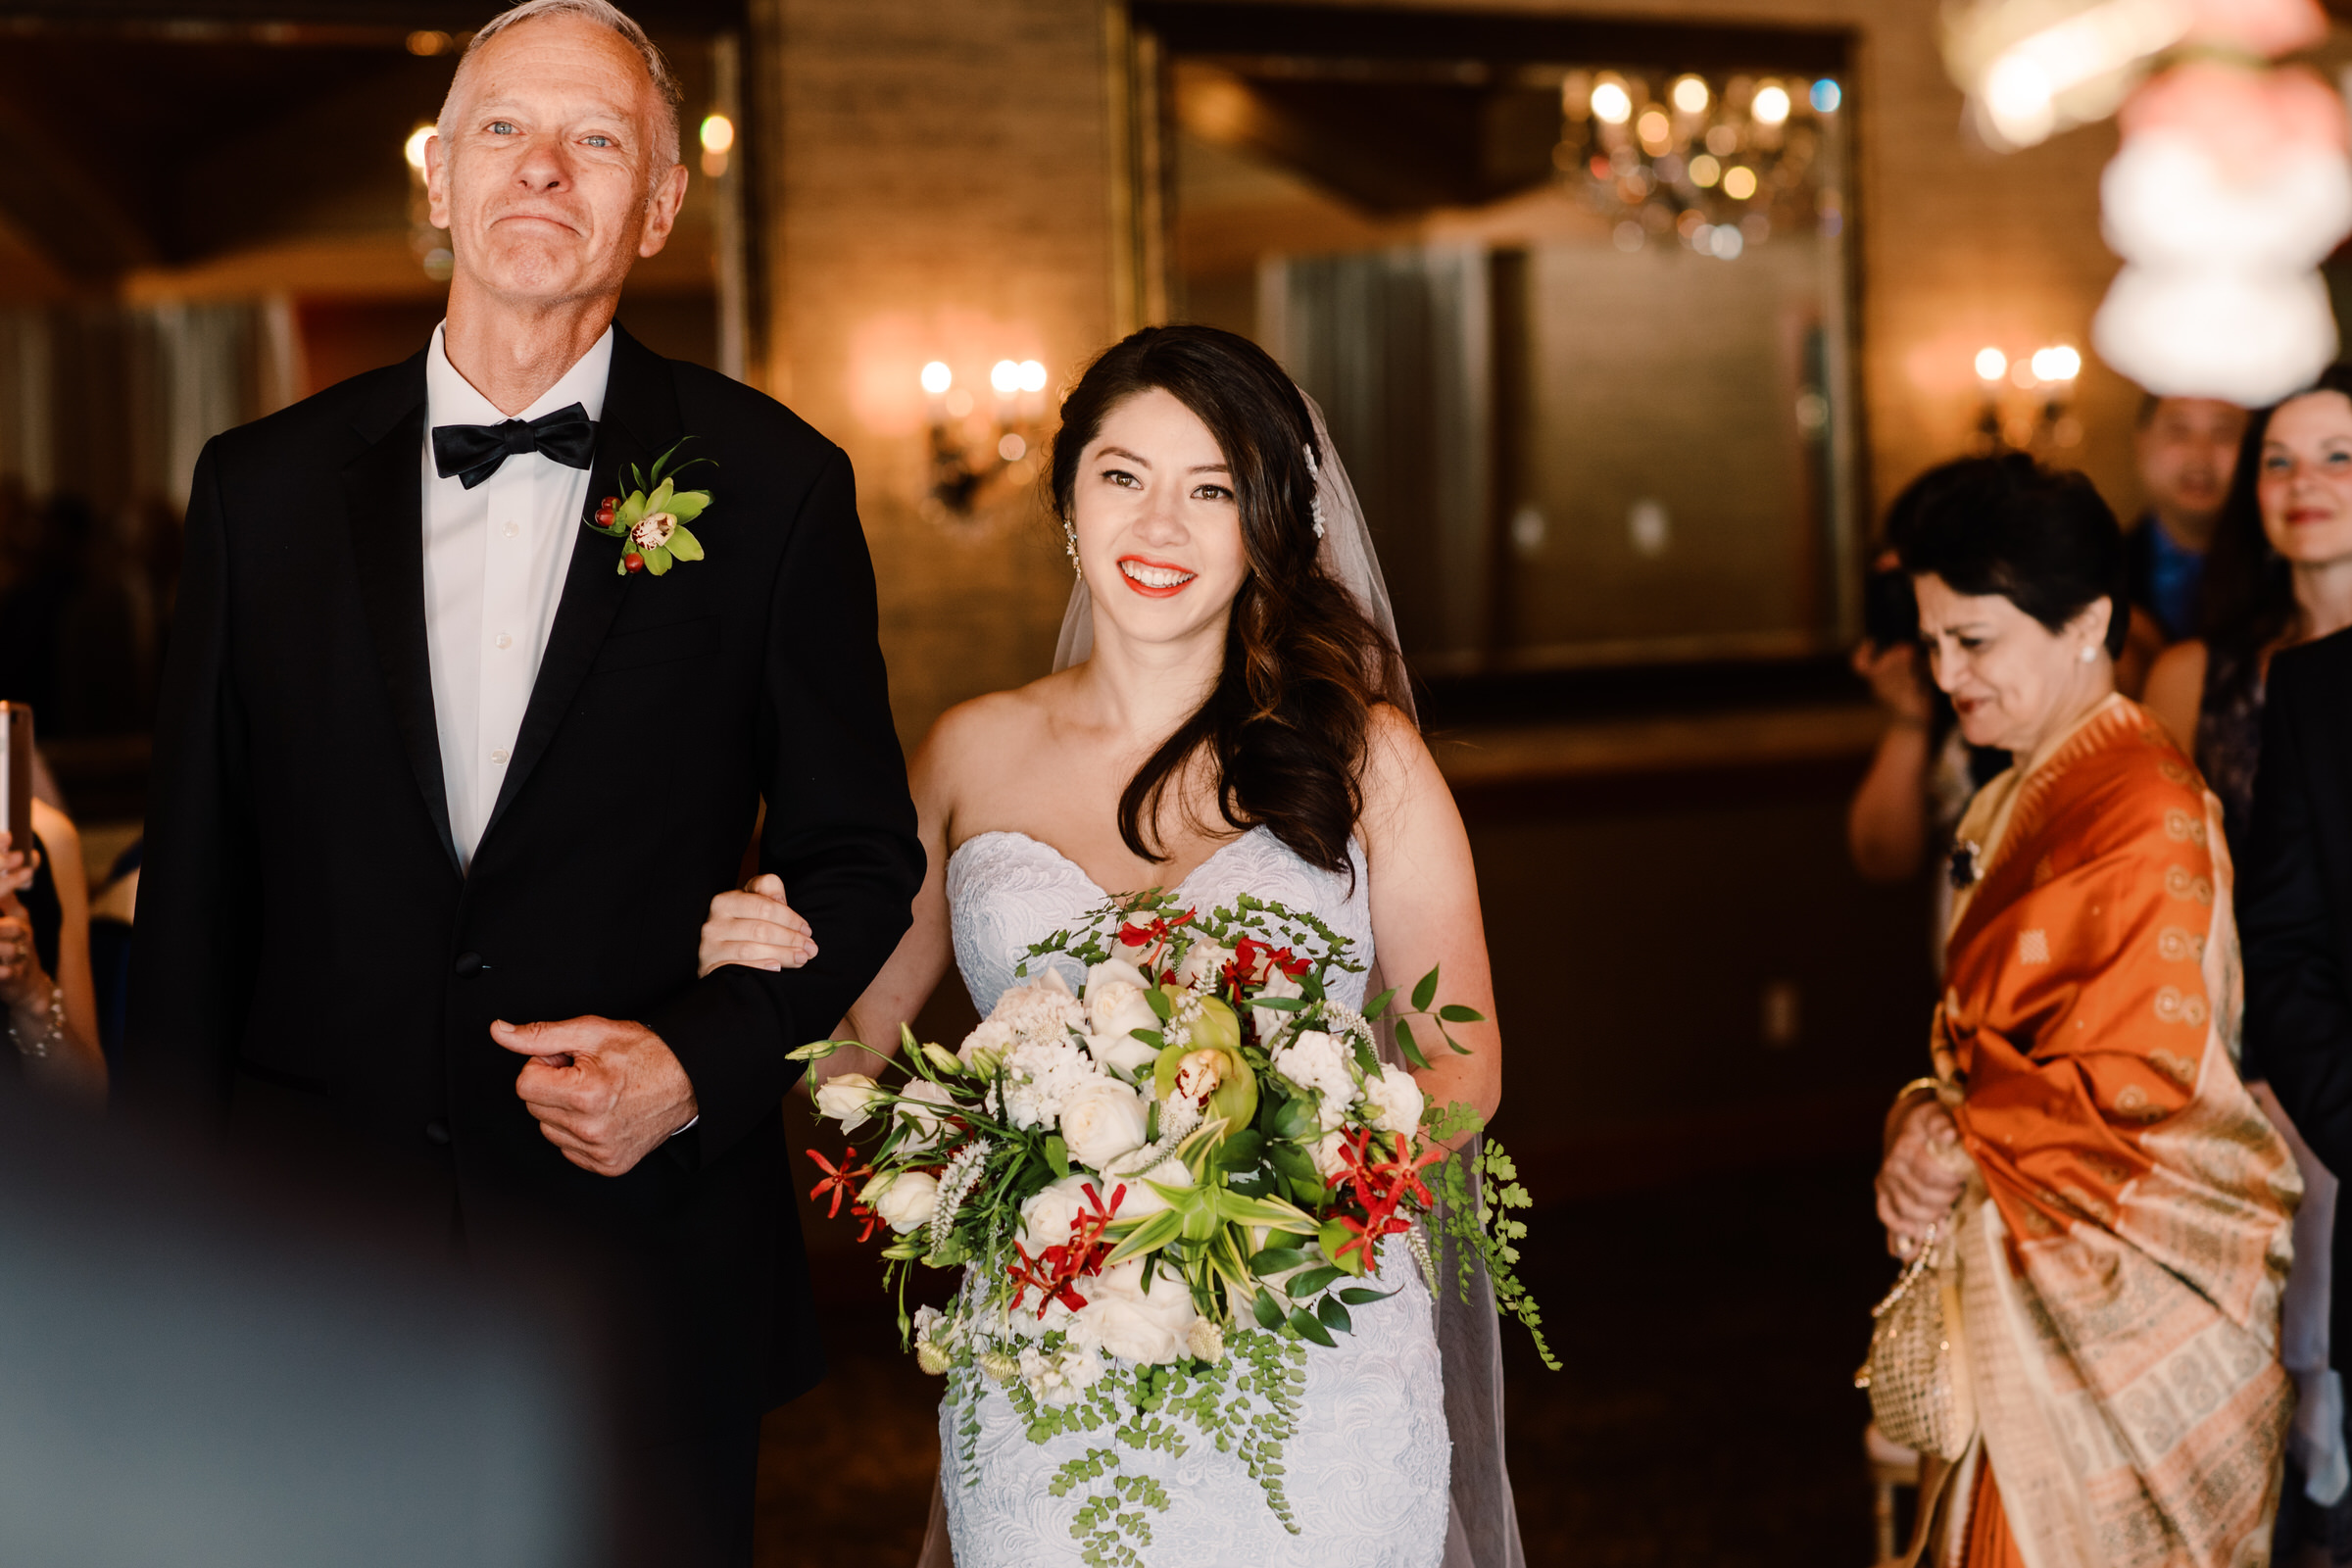 Bride Kelly and father walking down the aisle at the Edgewater. Photo by Jenn Tai, Seattle Wedding Photographer